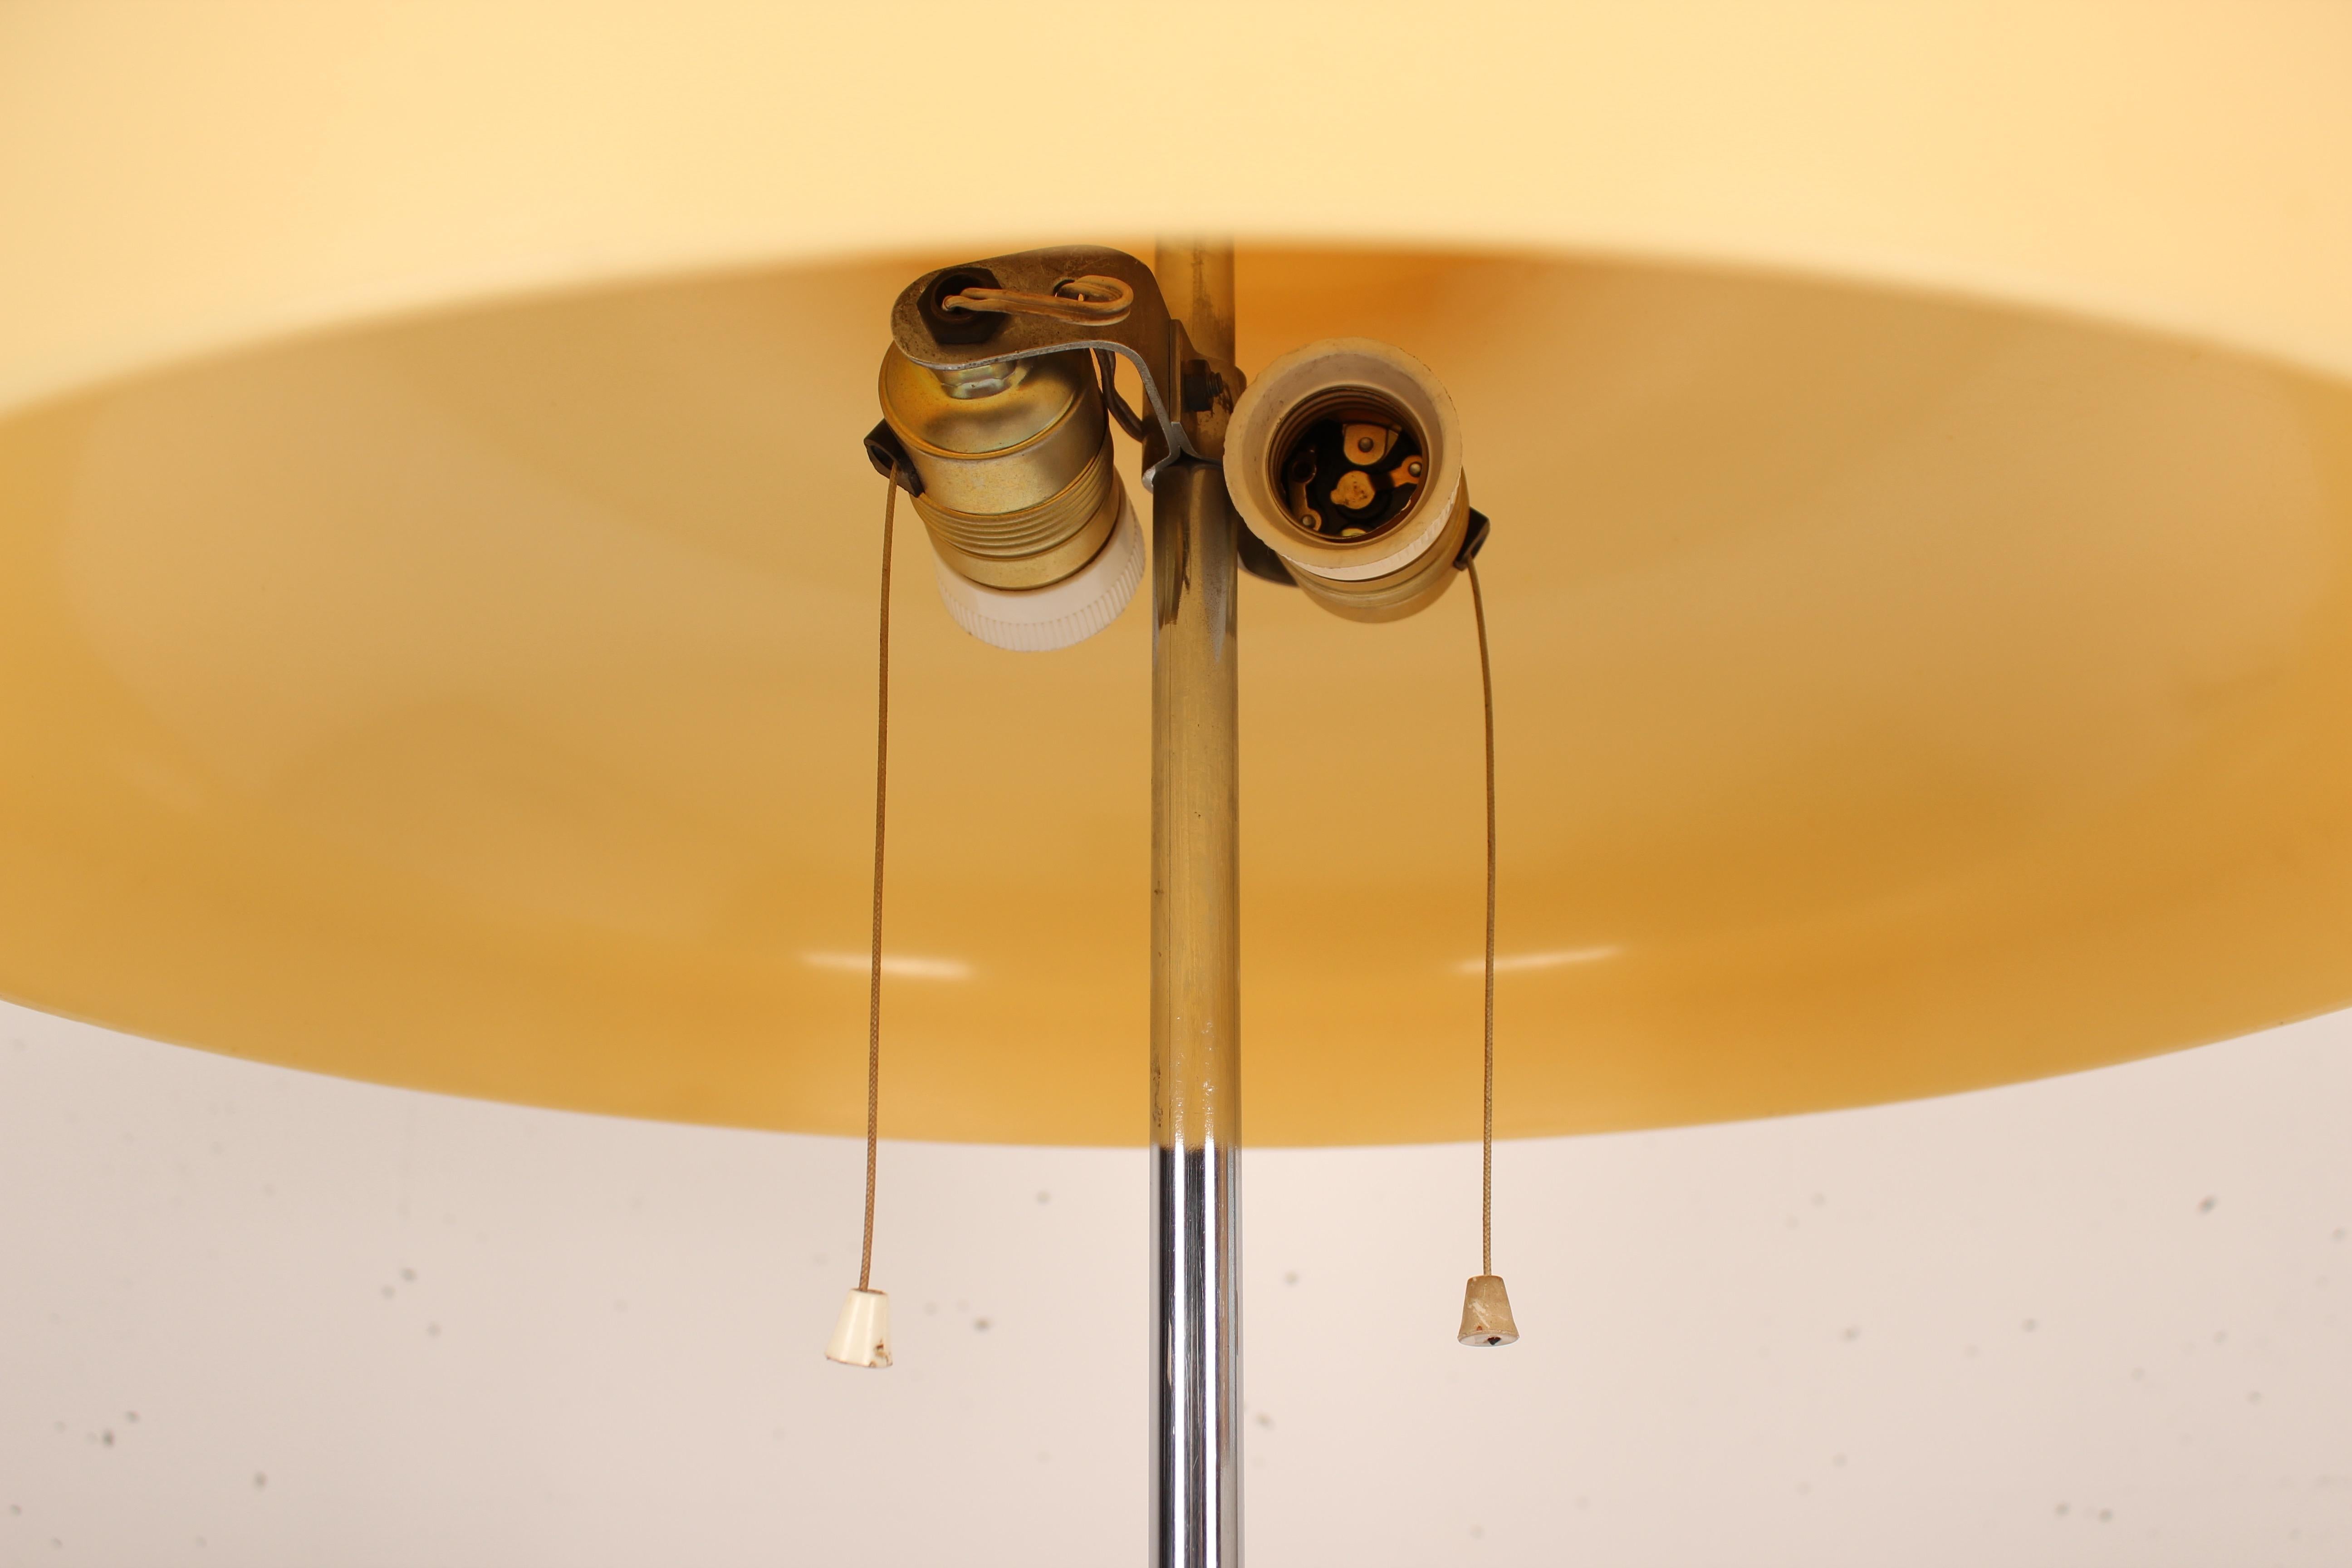 Mid-20th Century Mushroom Floor Lamp with Tulip Base Designed by A. Blanc for Tramo, Spain 1968 For Sale